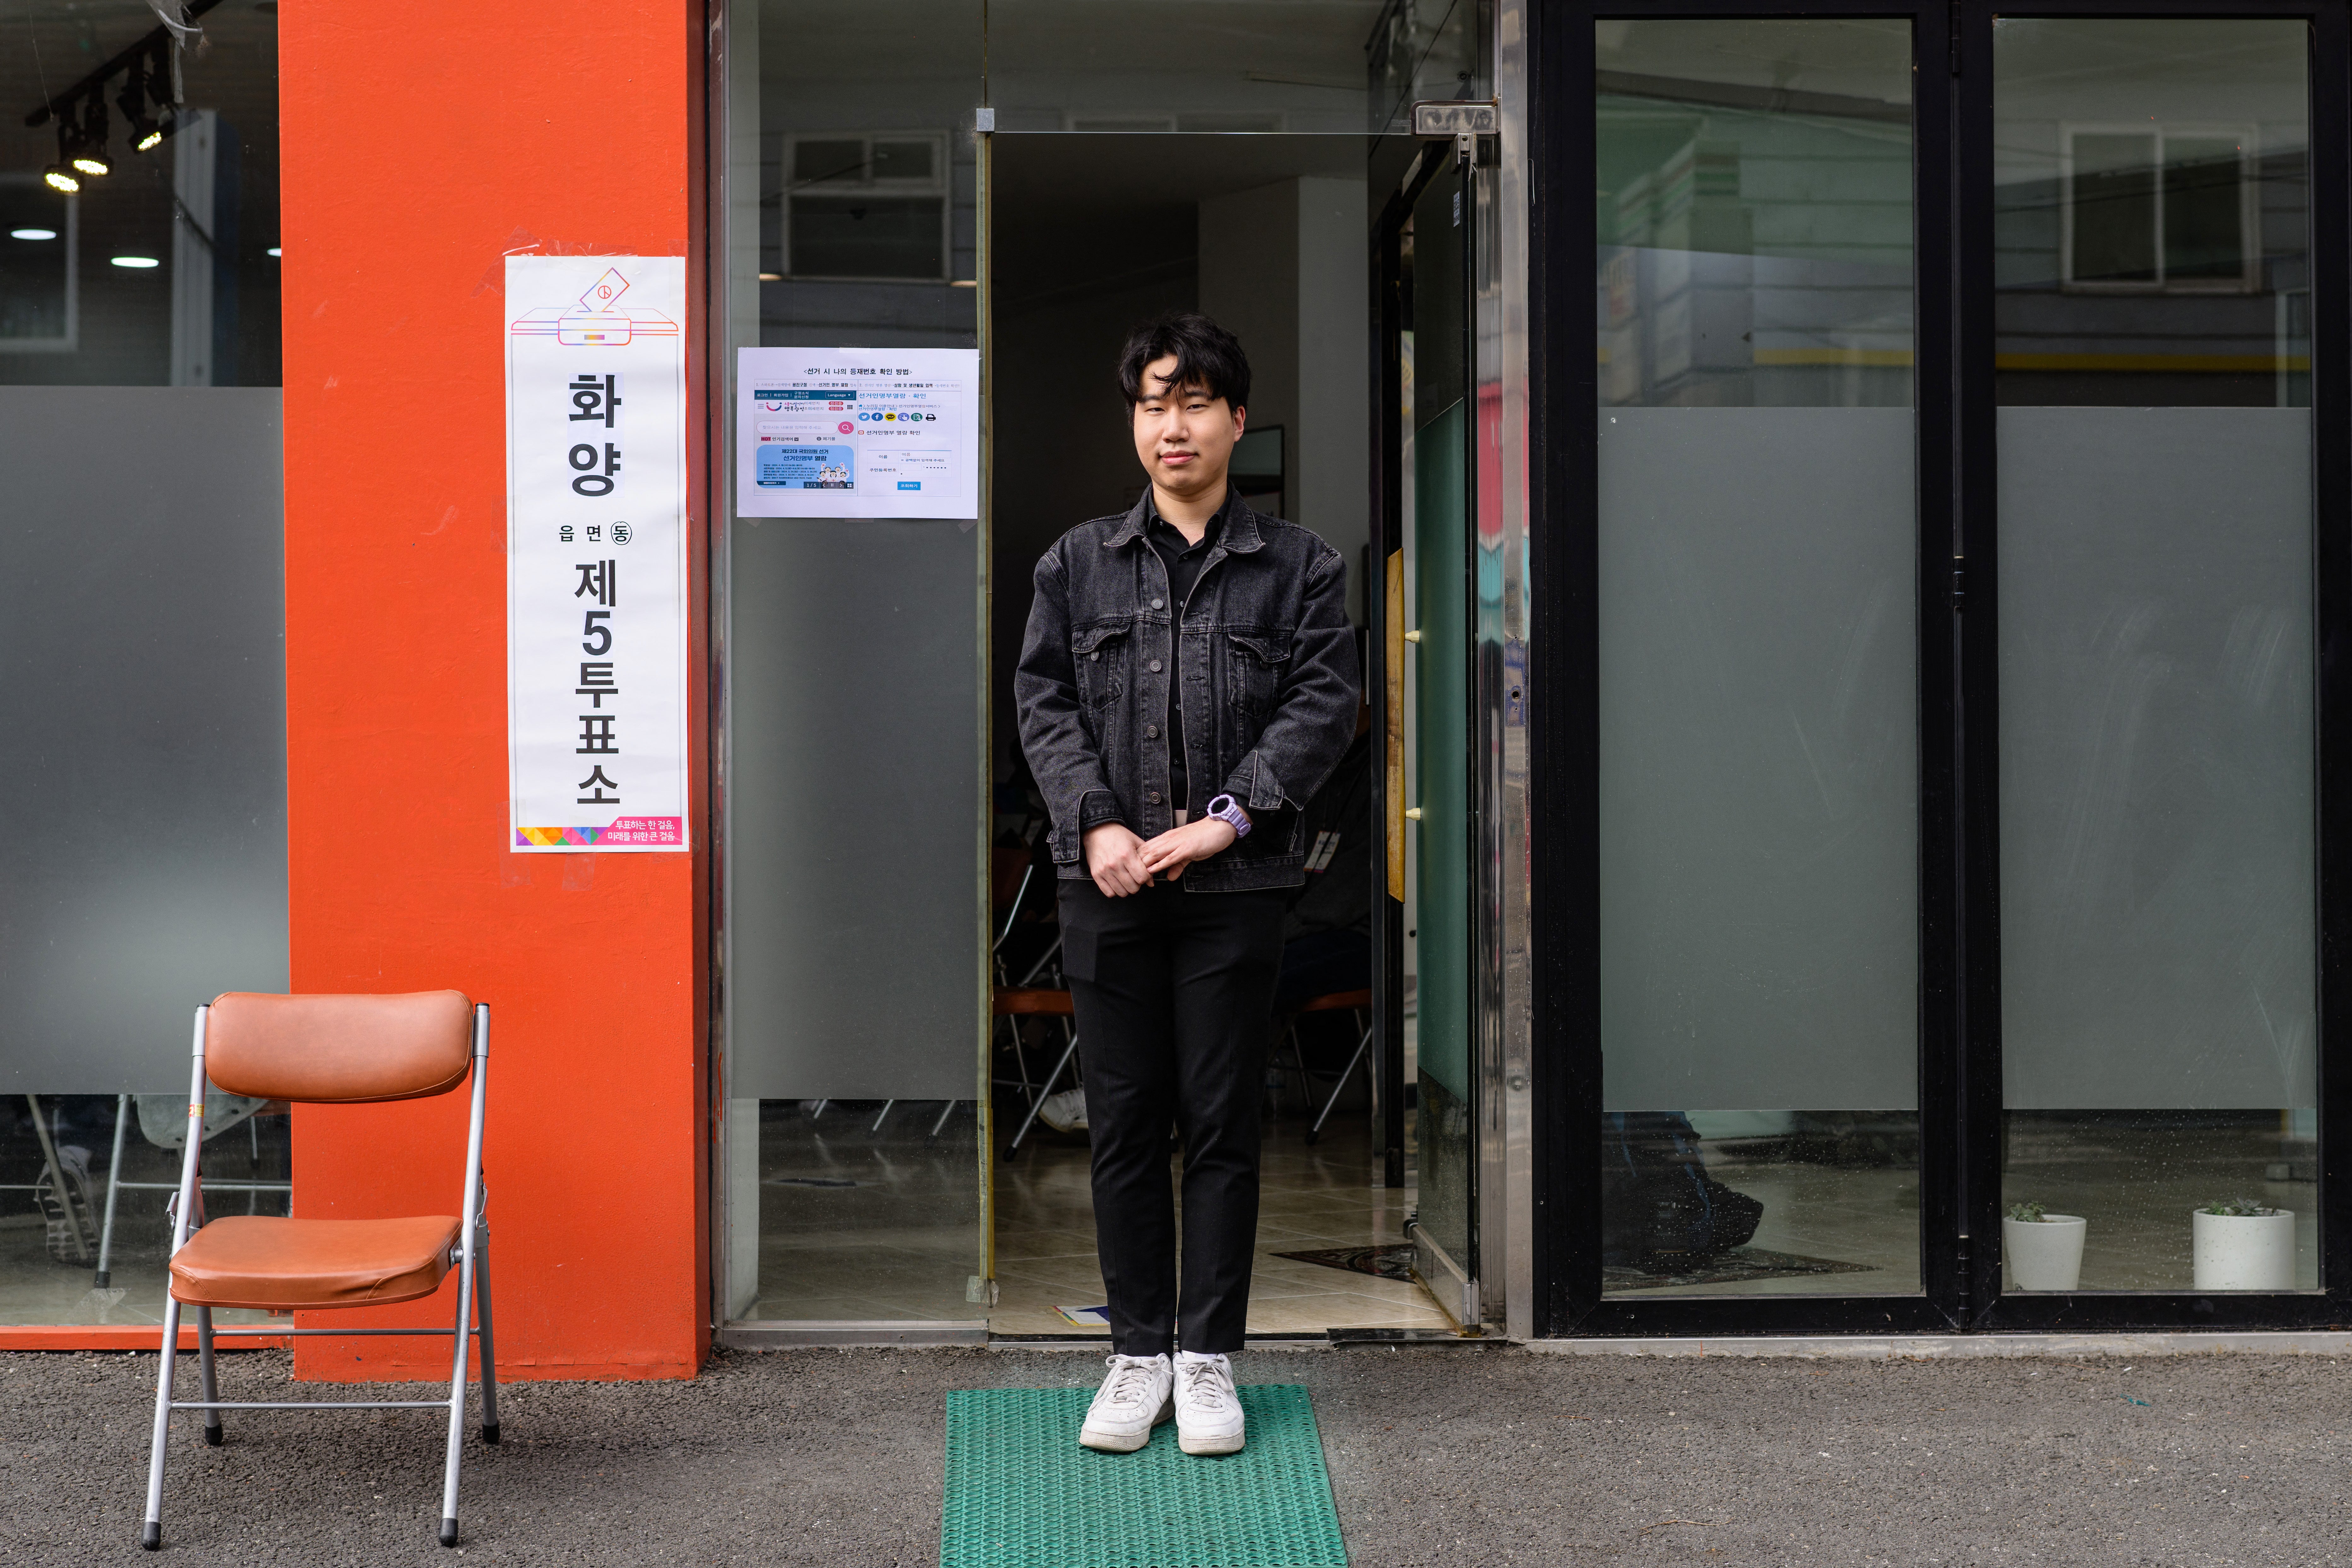 Kim Yong-ho, 24, who owns a food and beverages business, poses outside a polling station in Seoul on 10 April 2024, after voting for the first time, during the parliamentary election